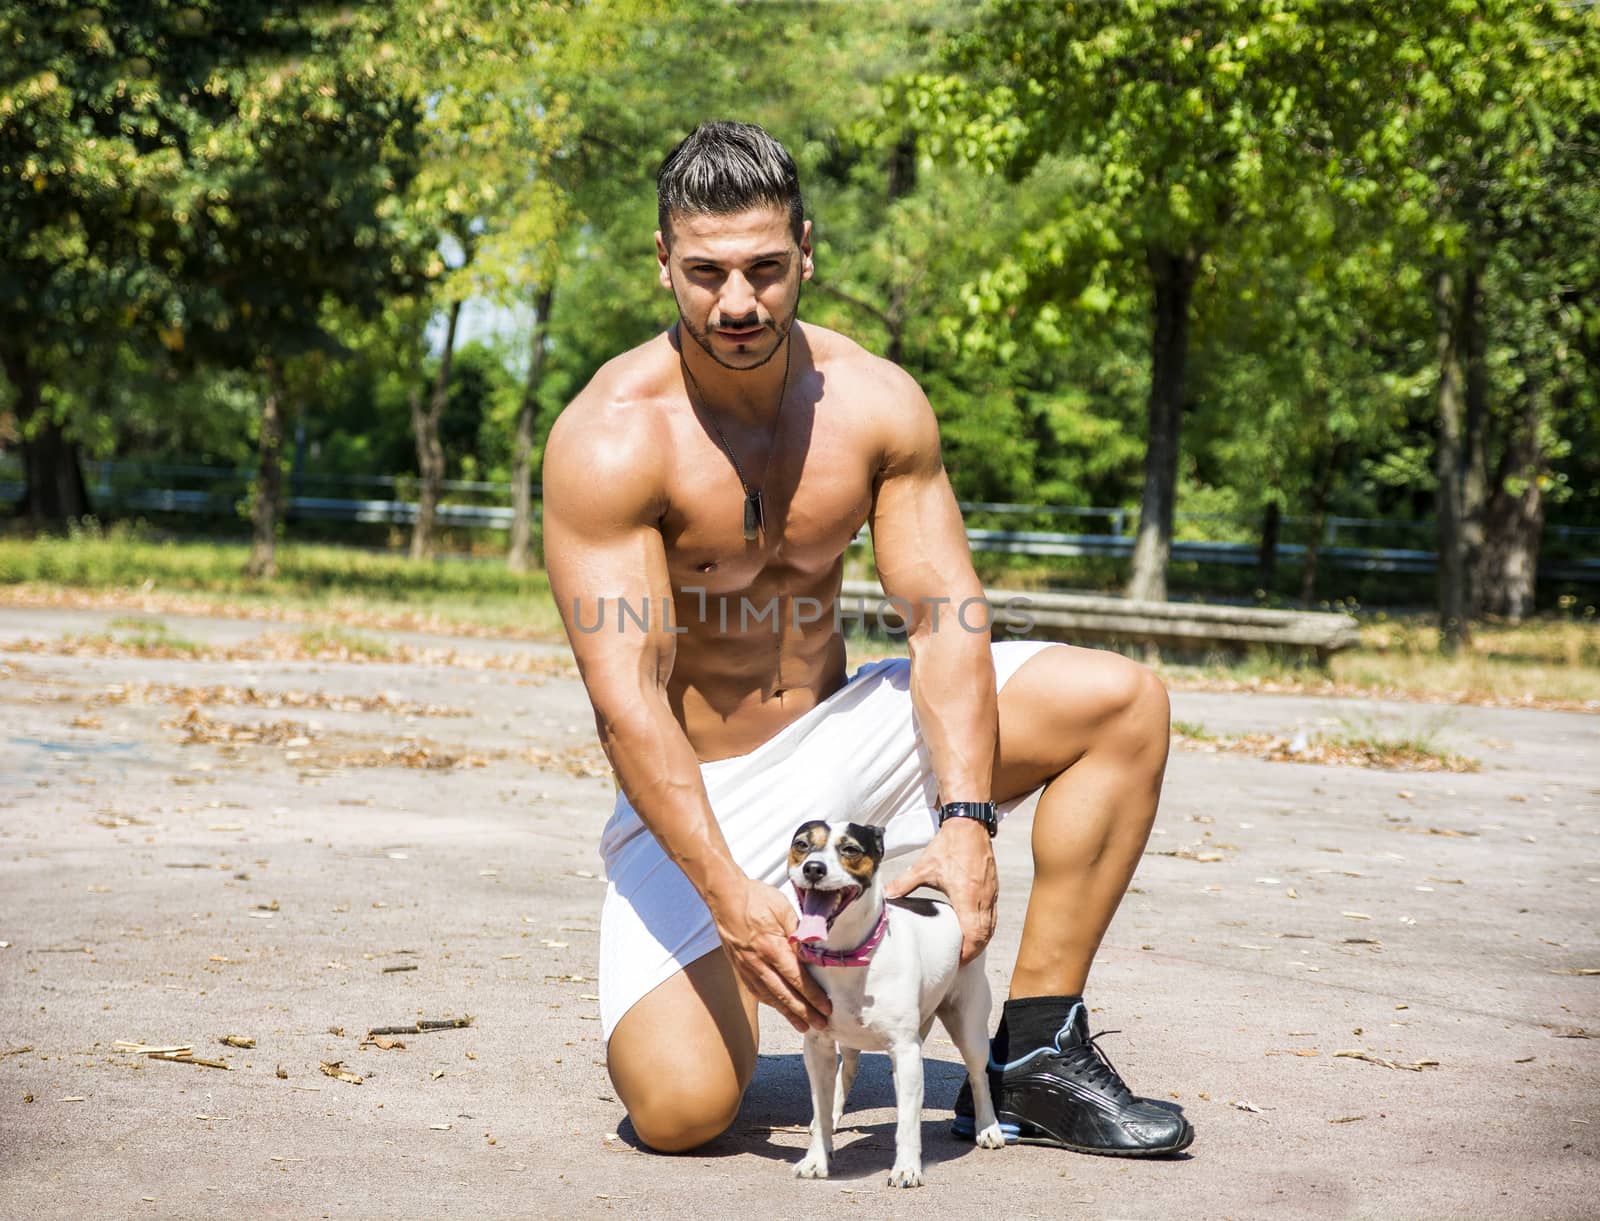 Shirtless Athletic Man with Dog in his Arms by artofphoto